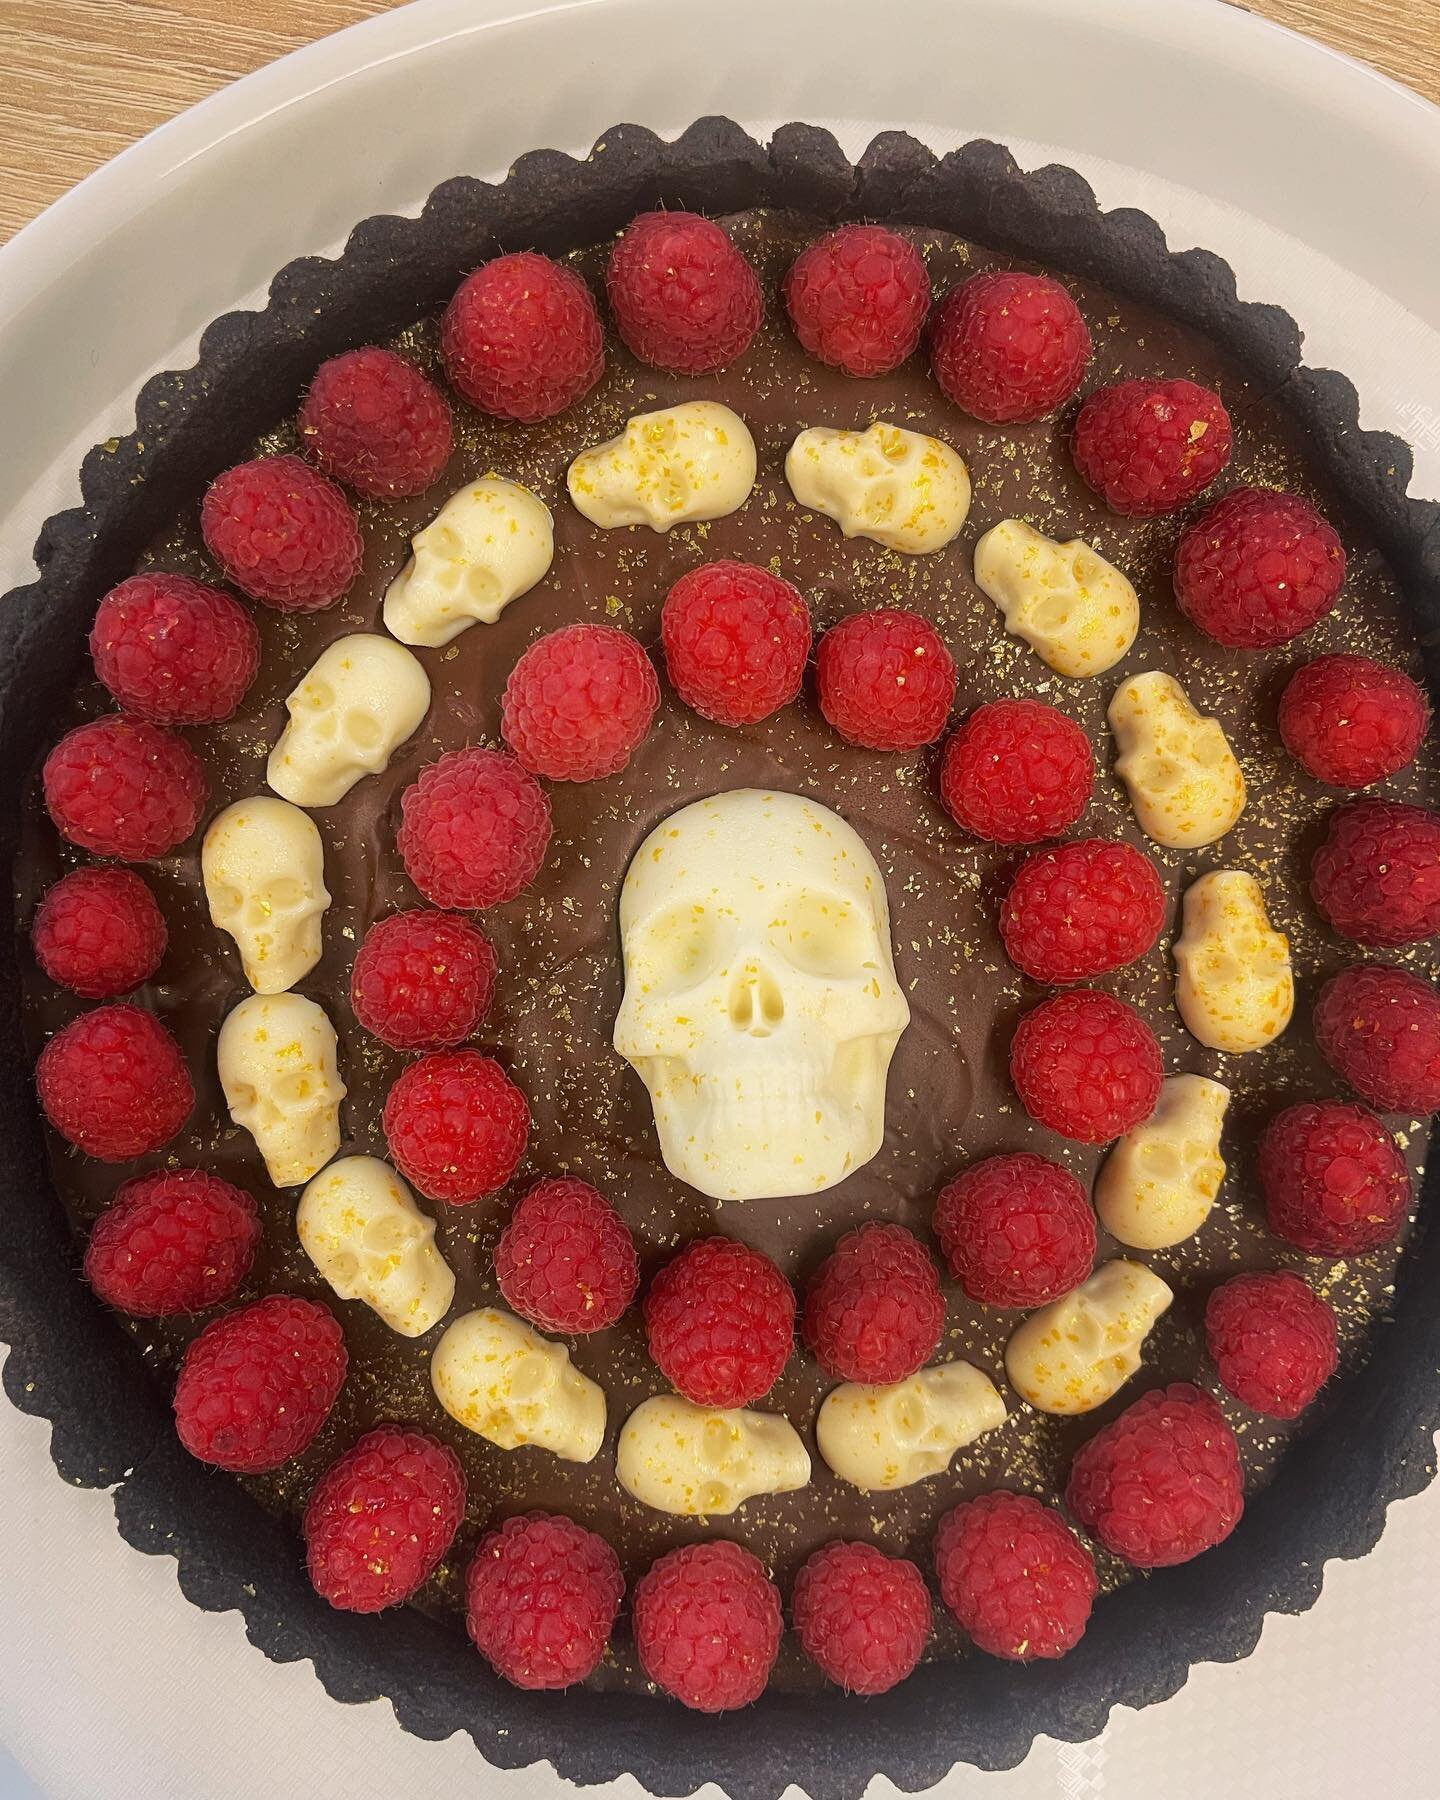 Oh and @tinlata and I made some tarts for #halloween as part of our PPD team costume @ghirardelli 💀👩🏻&zwj;🍳✨